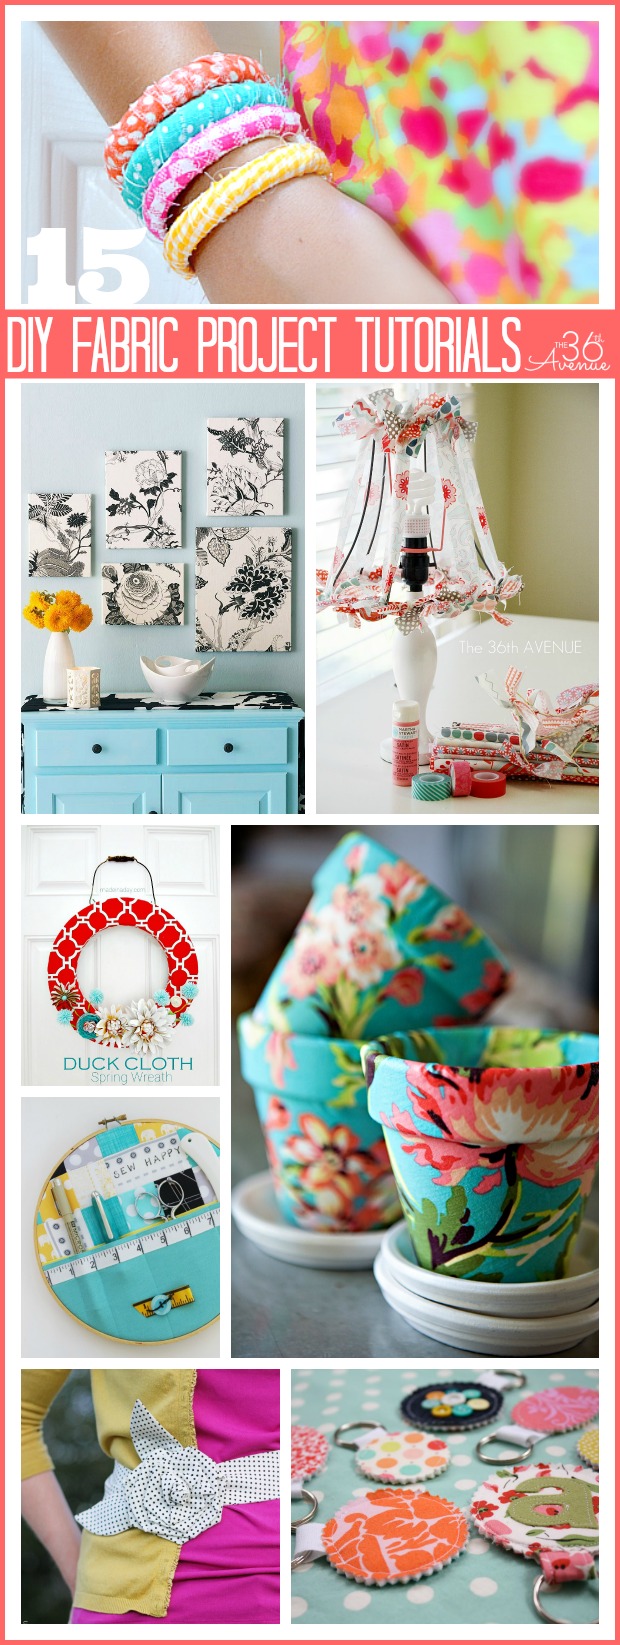 DIY 36 Fabric No-Sew Projects - New Craft Works